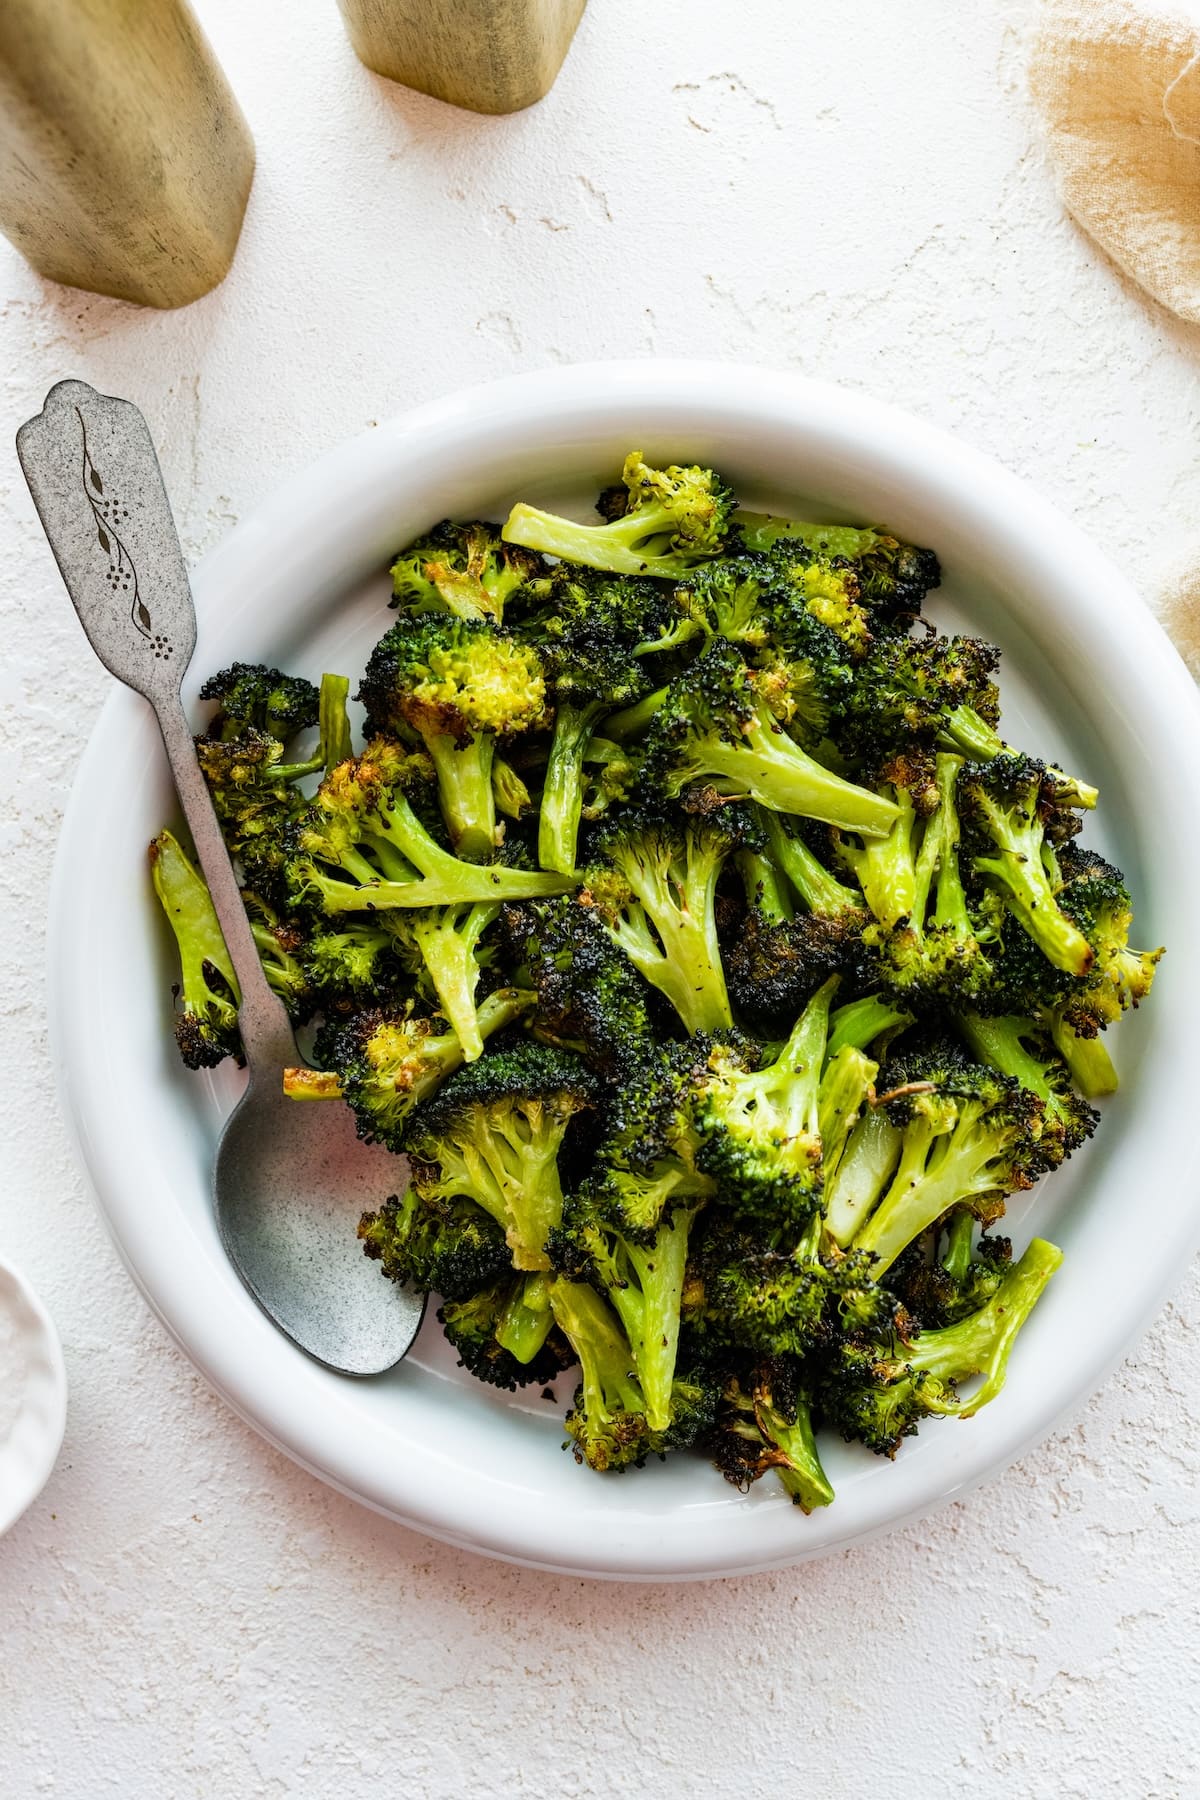 Roasted broccoli on a white plate with a serving spoon.